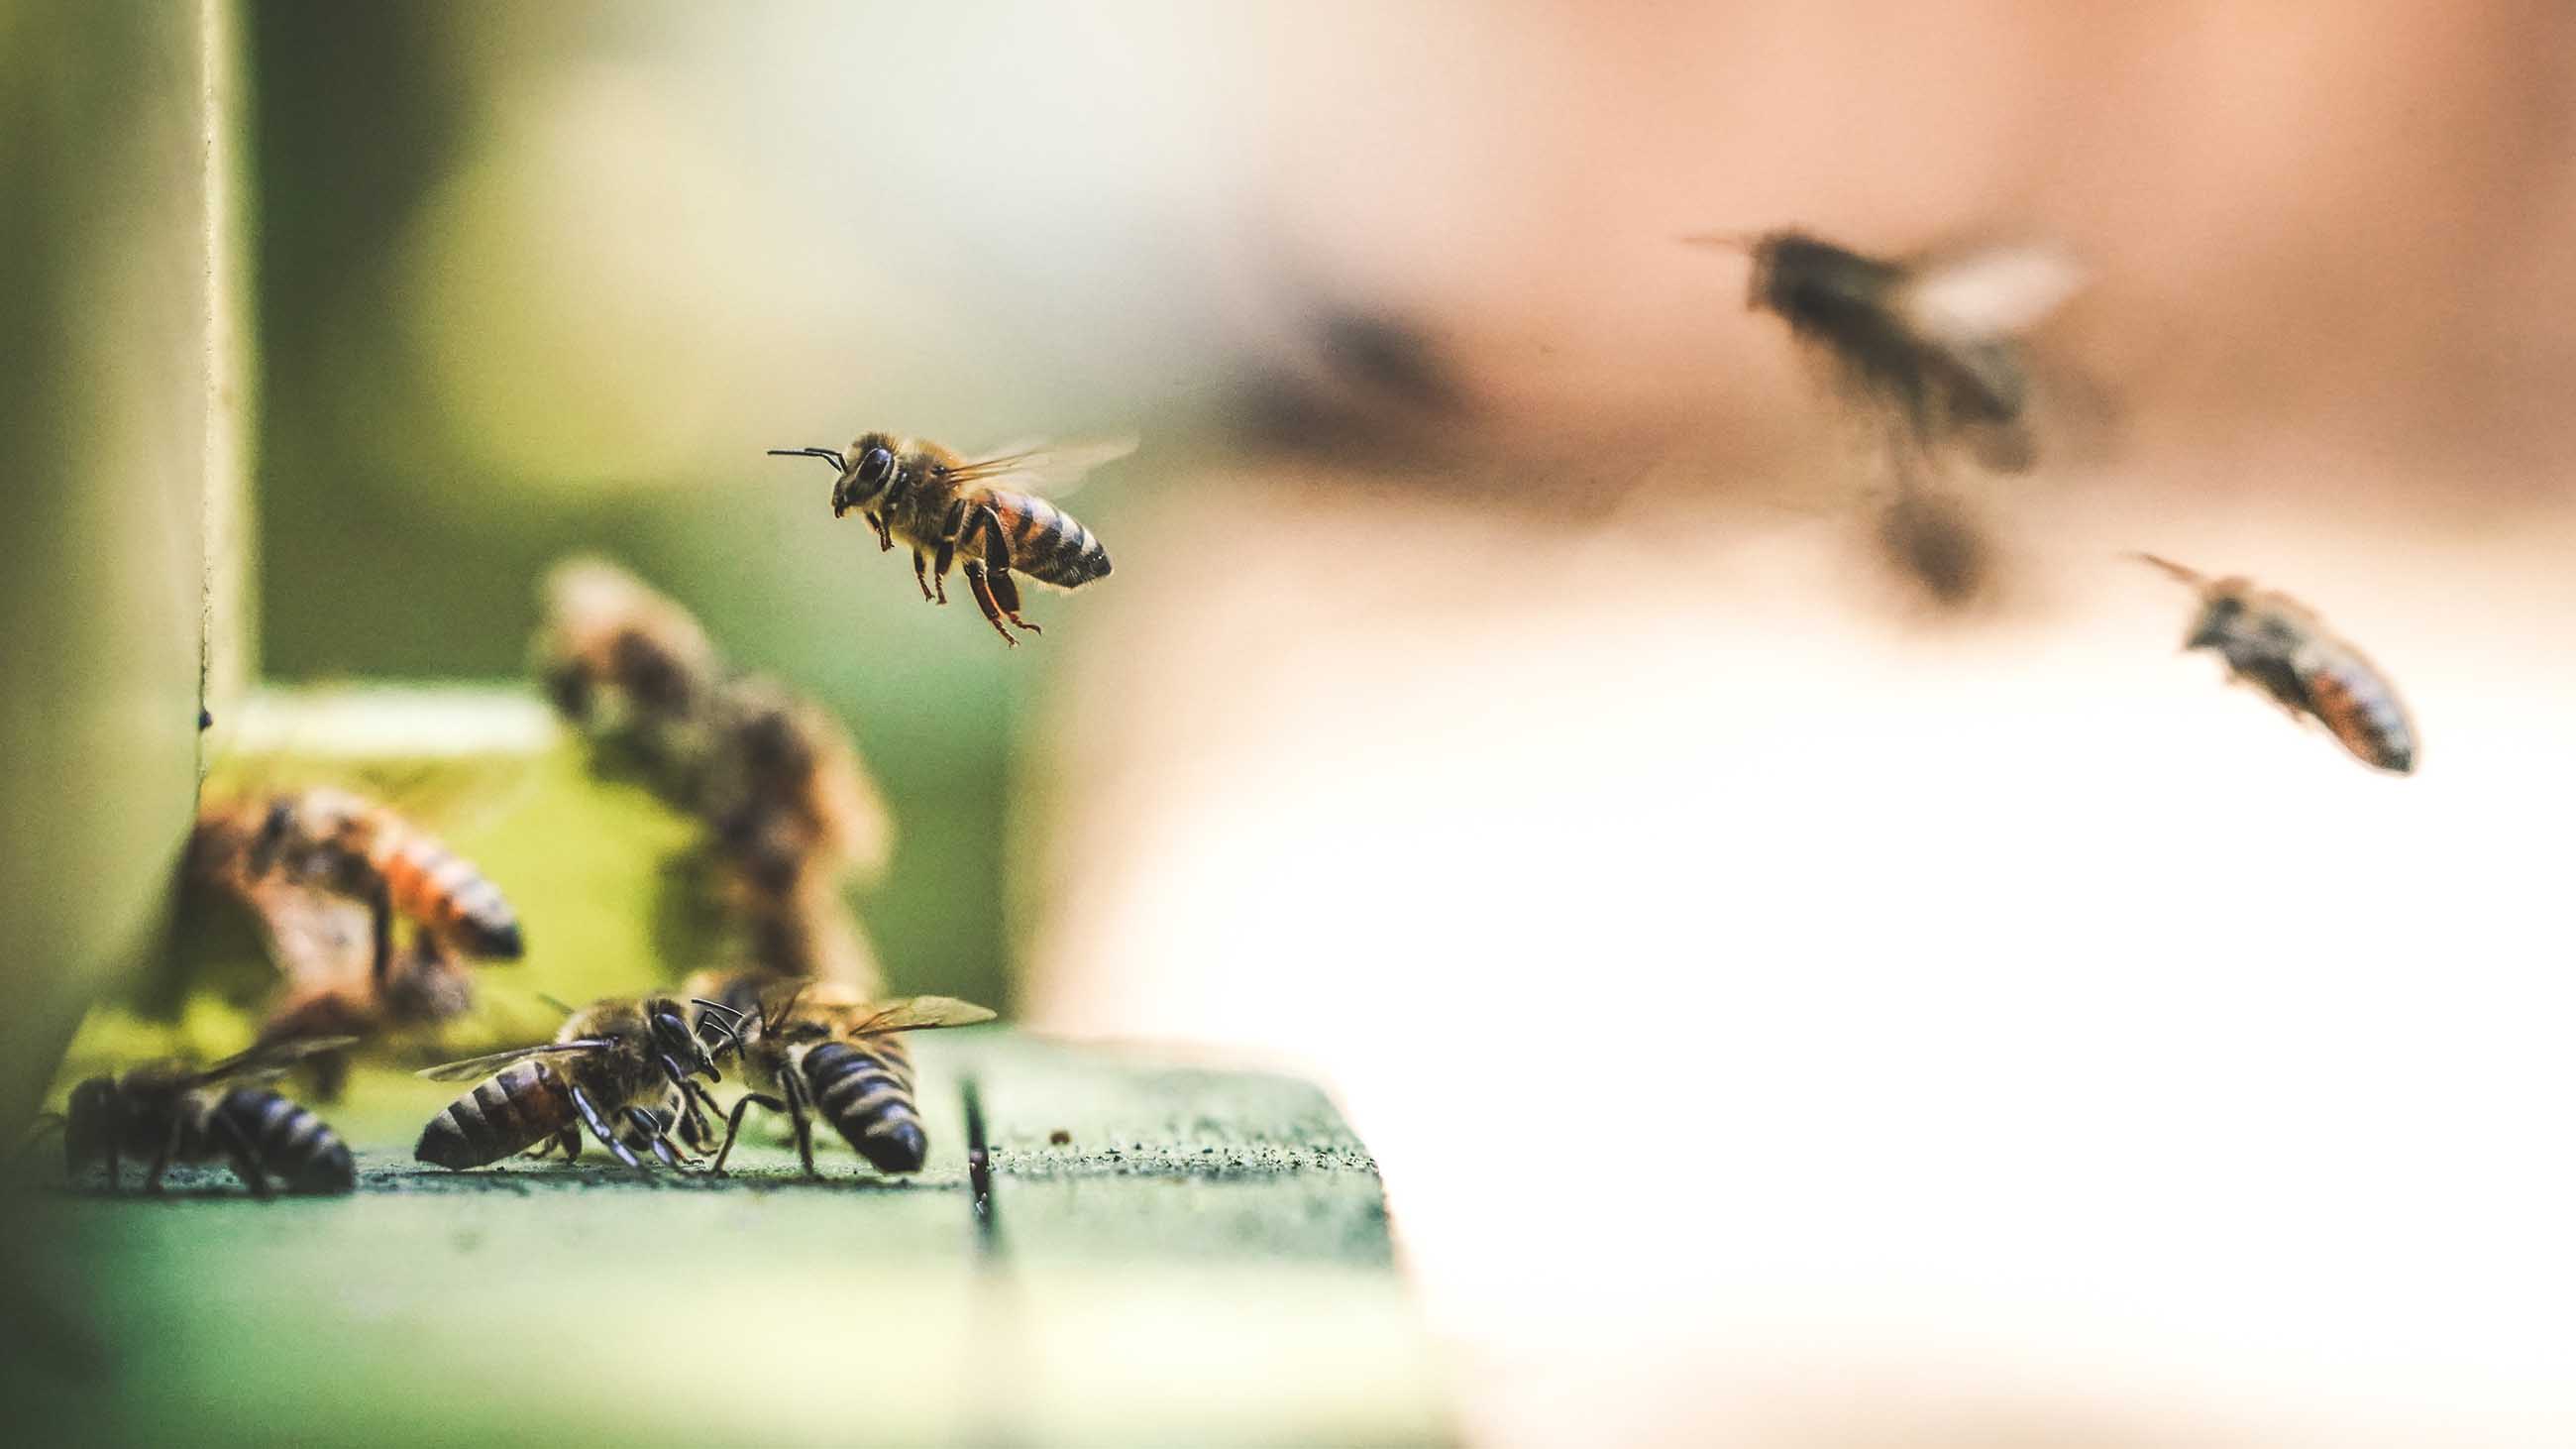 Humans are not the only animals to display collective intelligence. Bees are also well known for their ability to make accurate collective decisions and are capable of avoiding maladaptive herding.